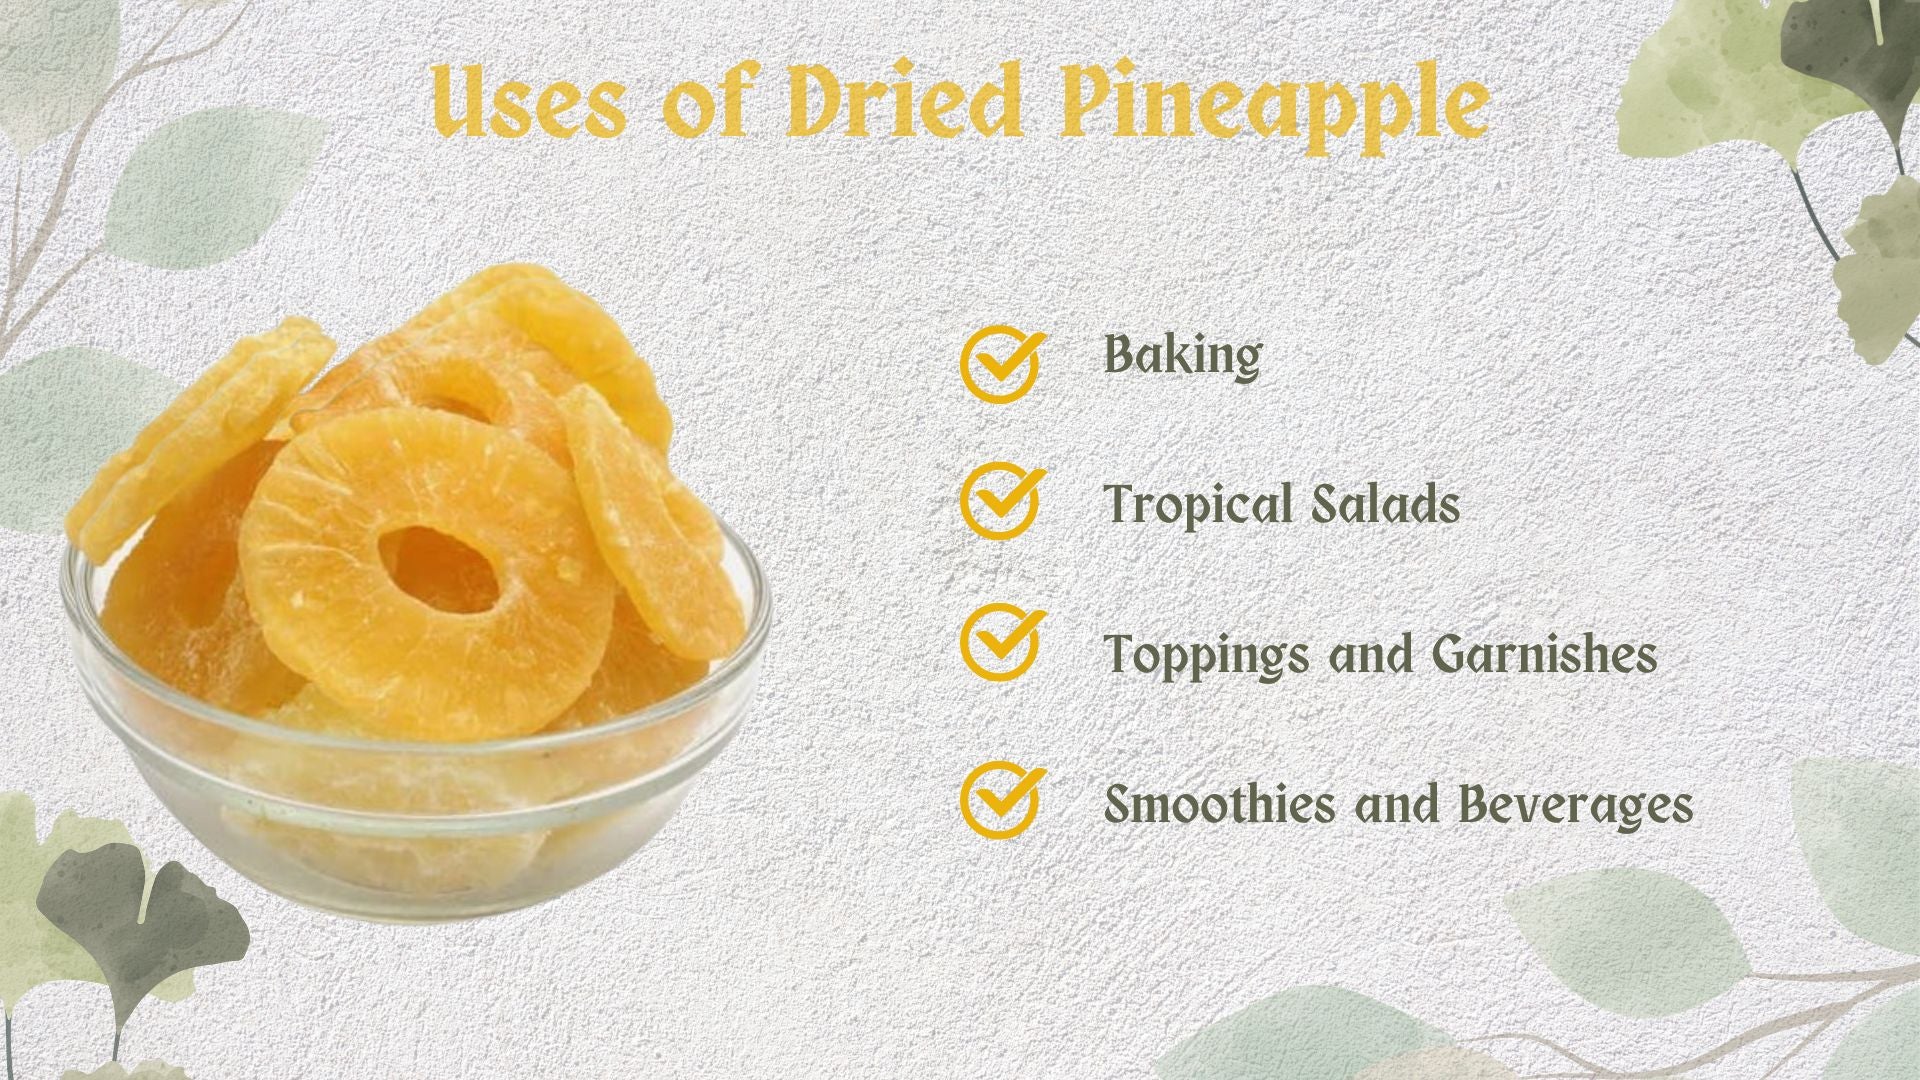 Here are some of the uses of Farmonics dry pineapple